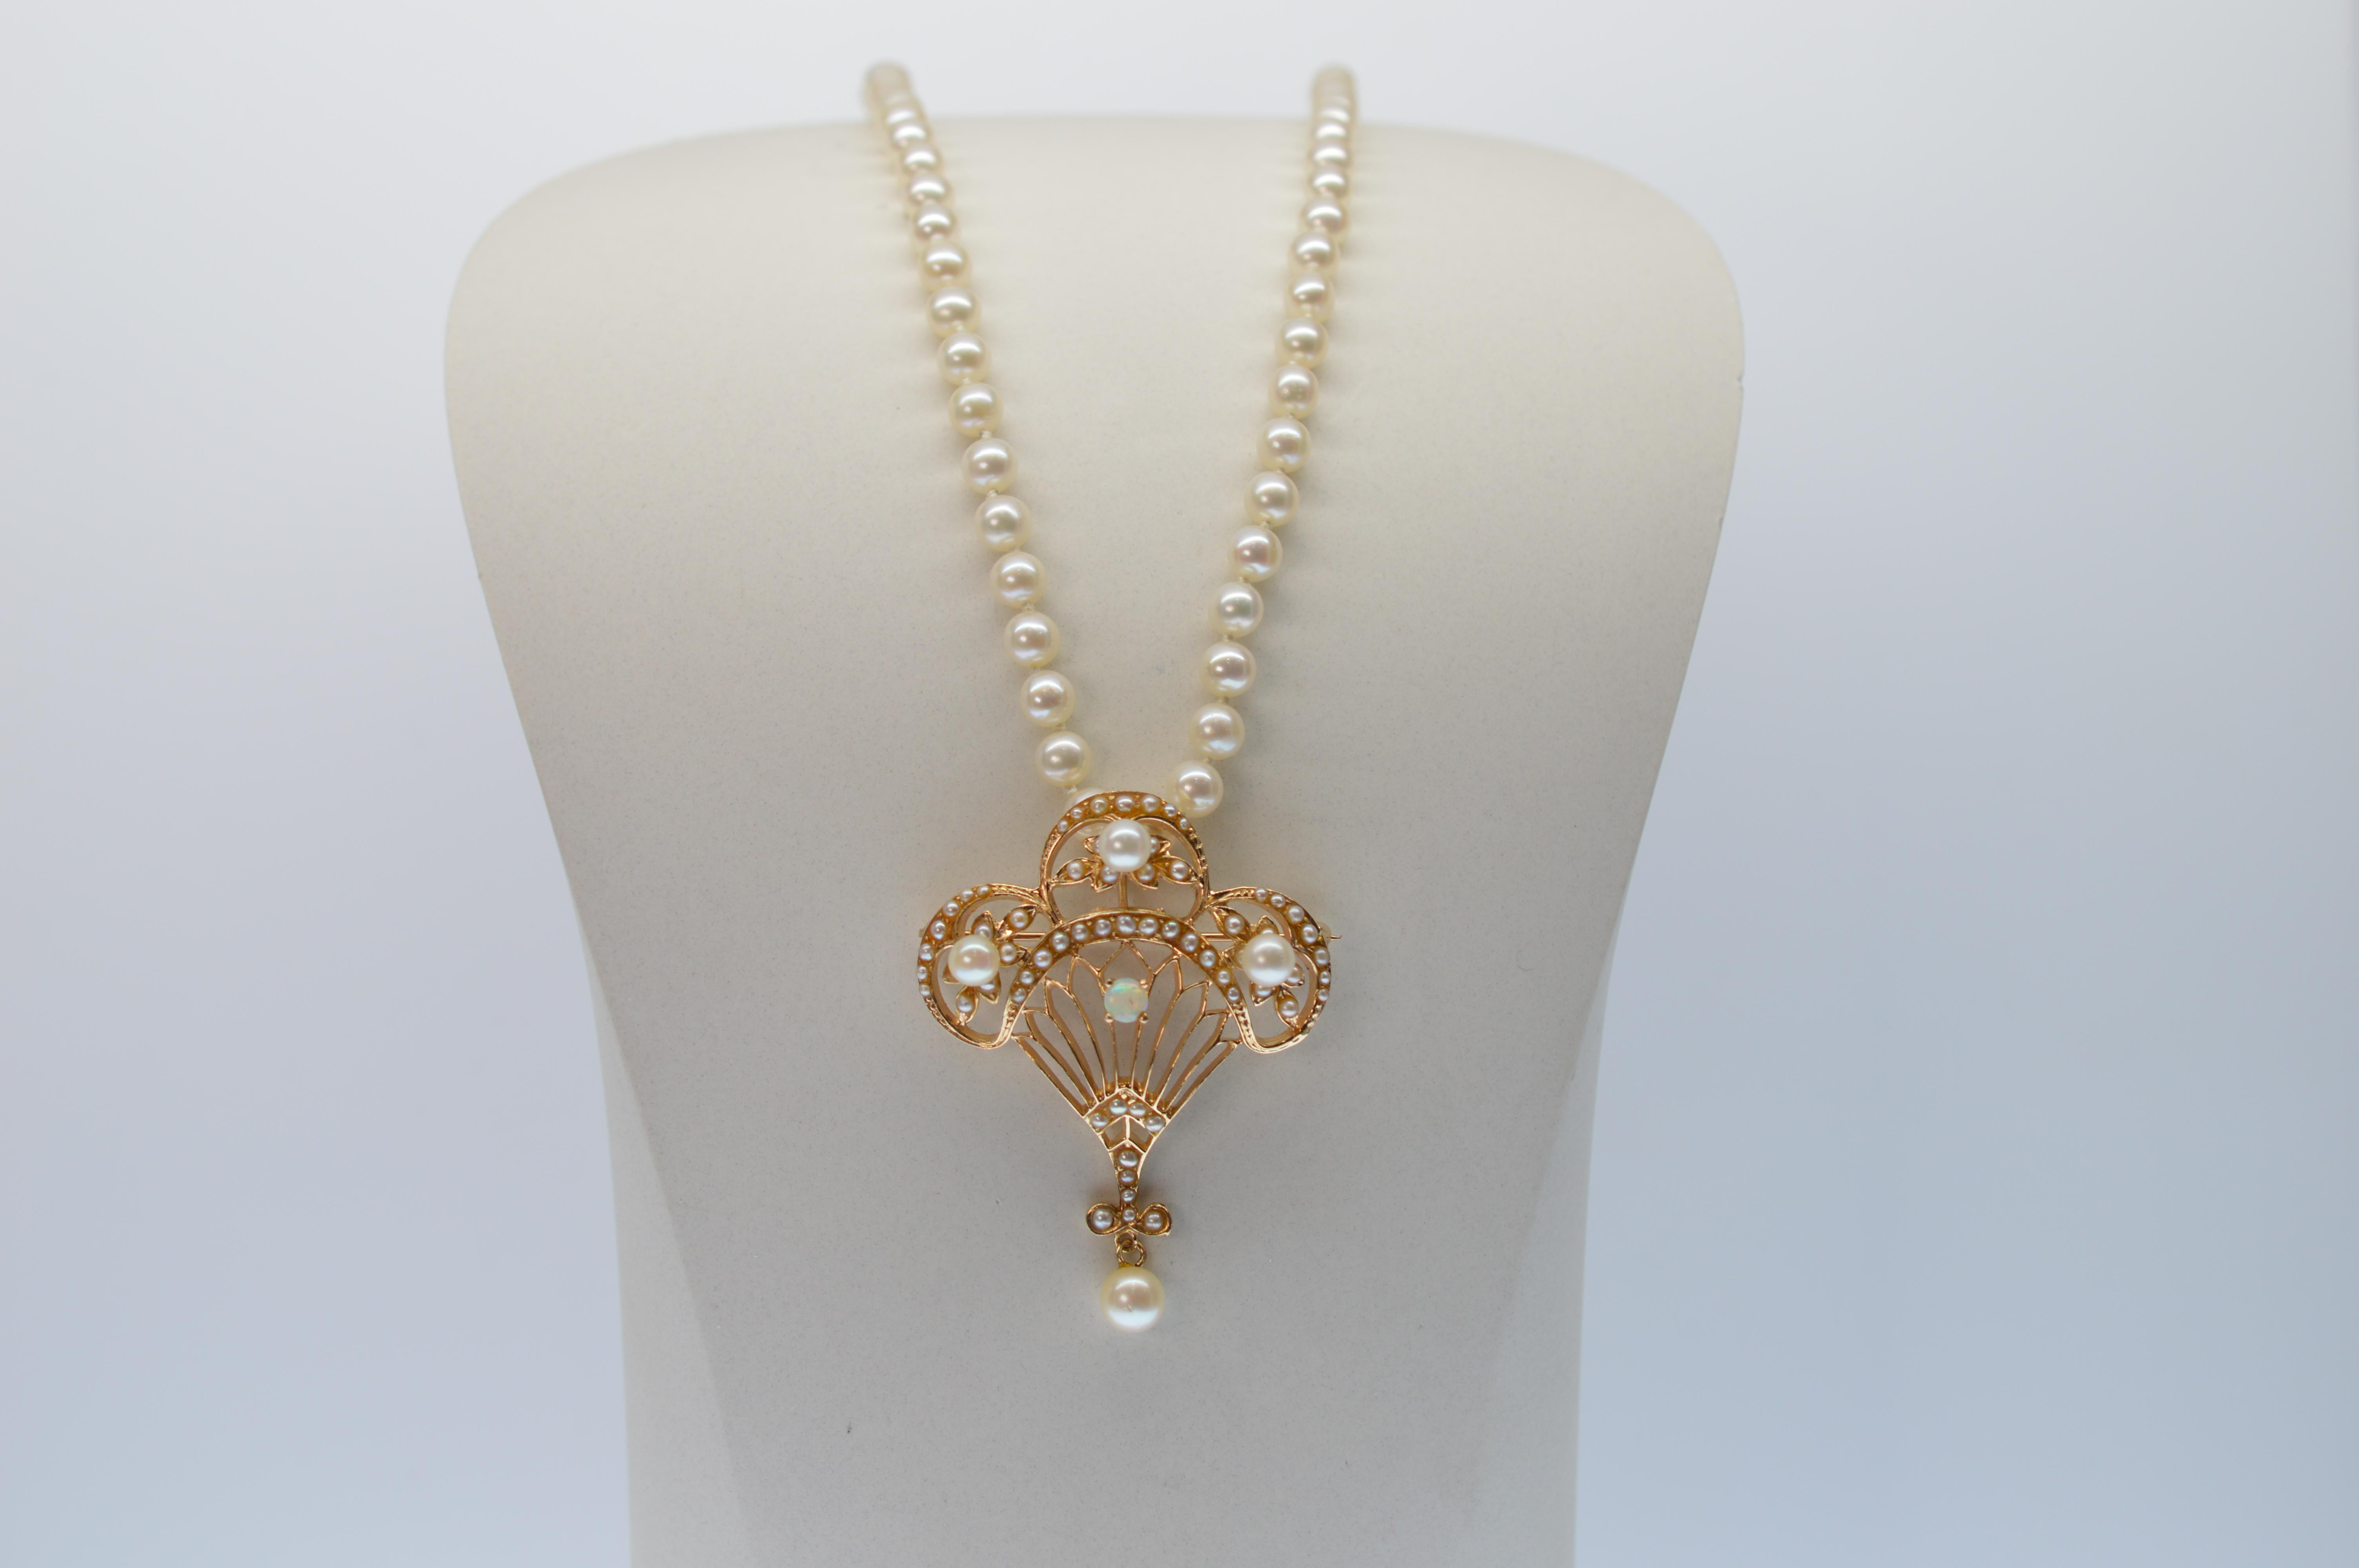 Pearl Necklace with Fancy Antique Style 14K Gold, Opal & Pearl Pendant Brooch  1